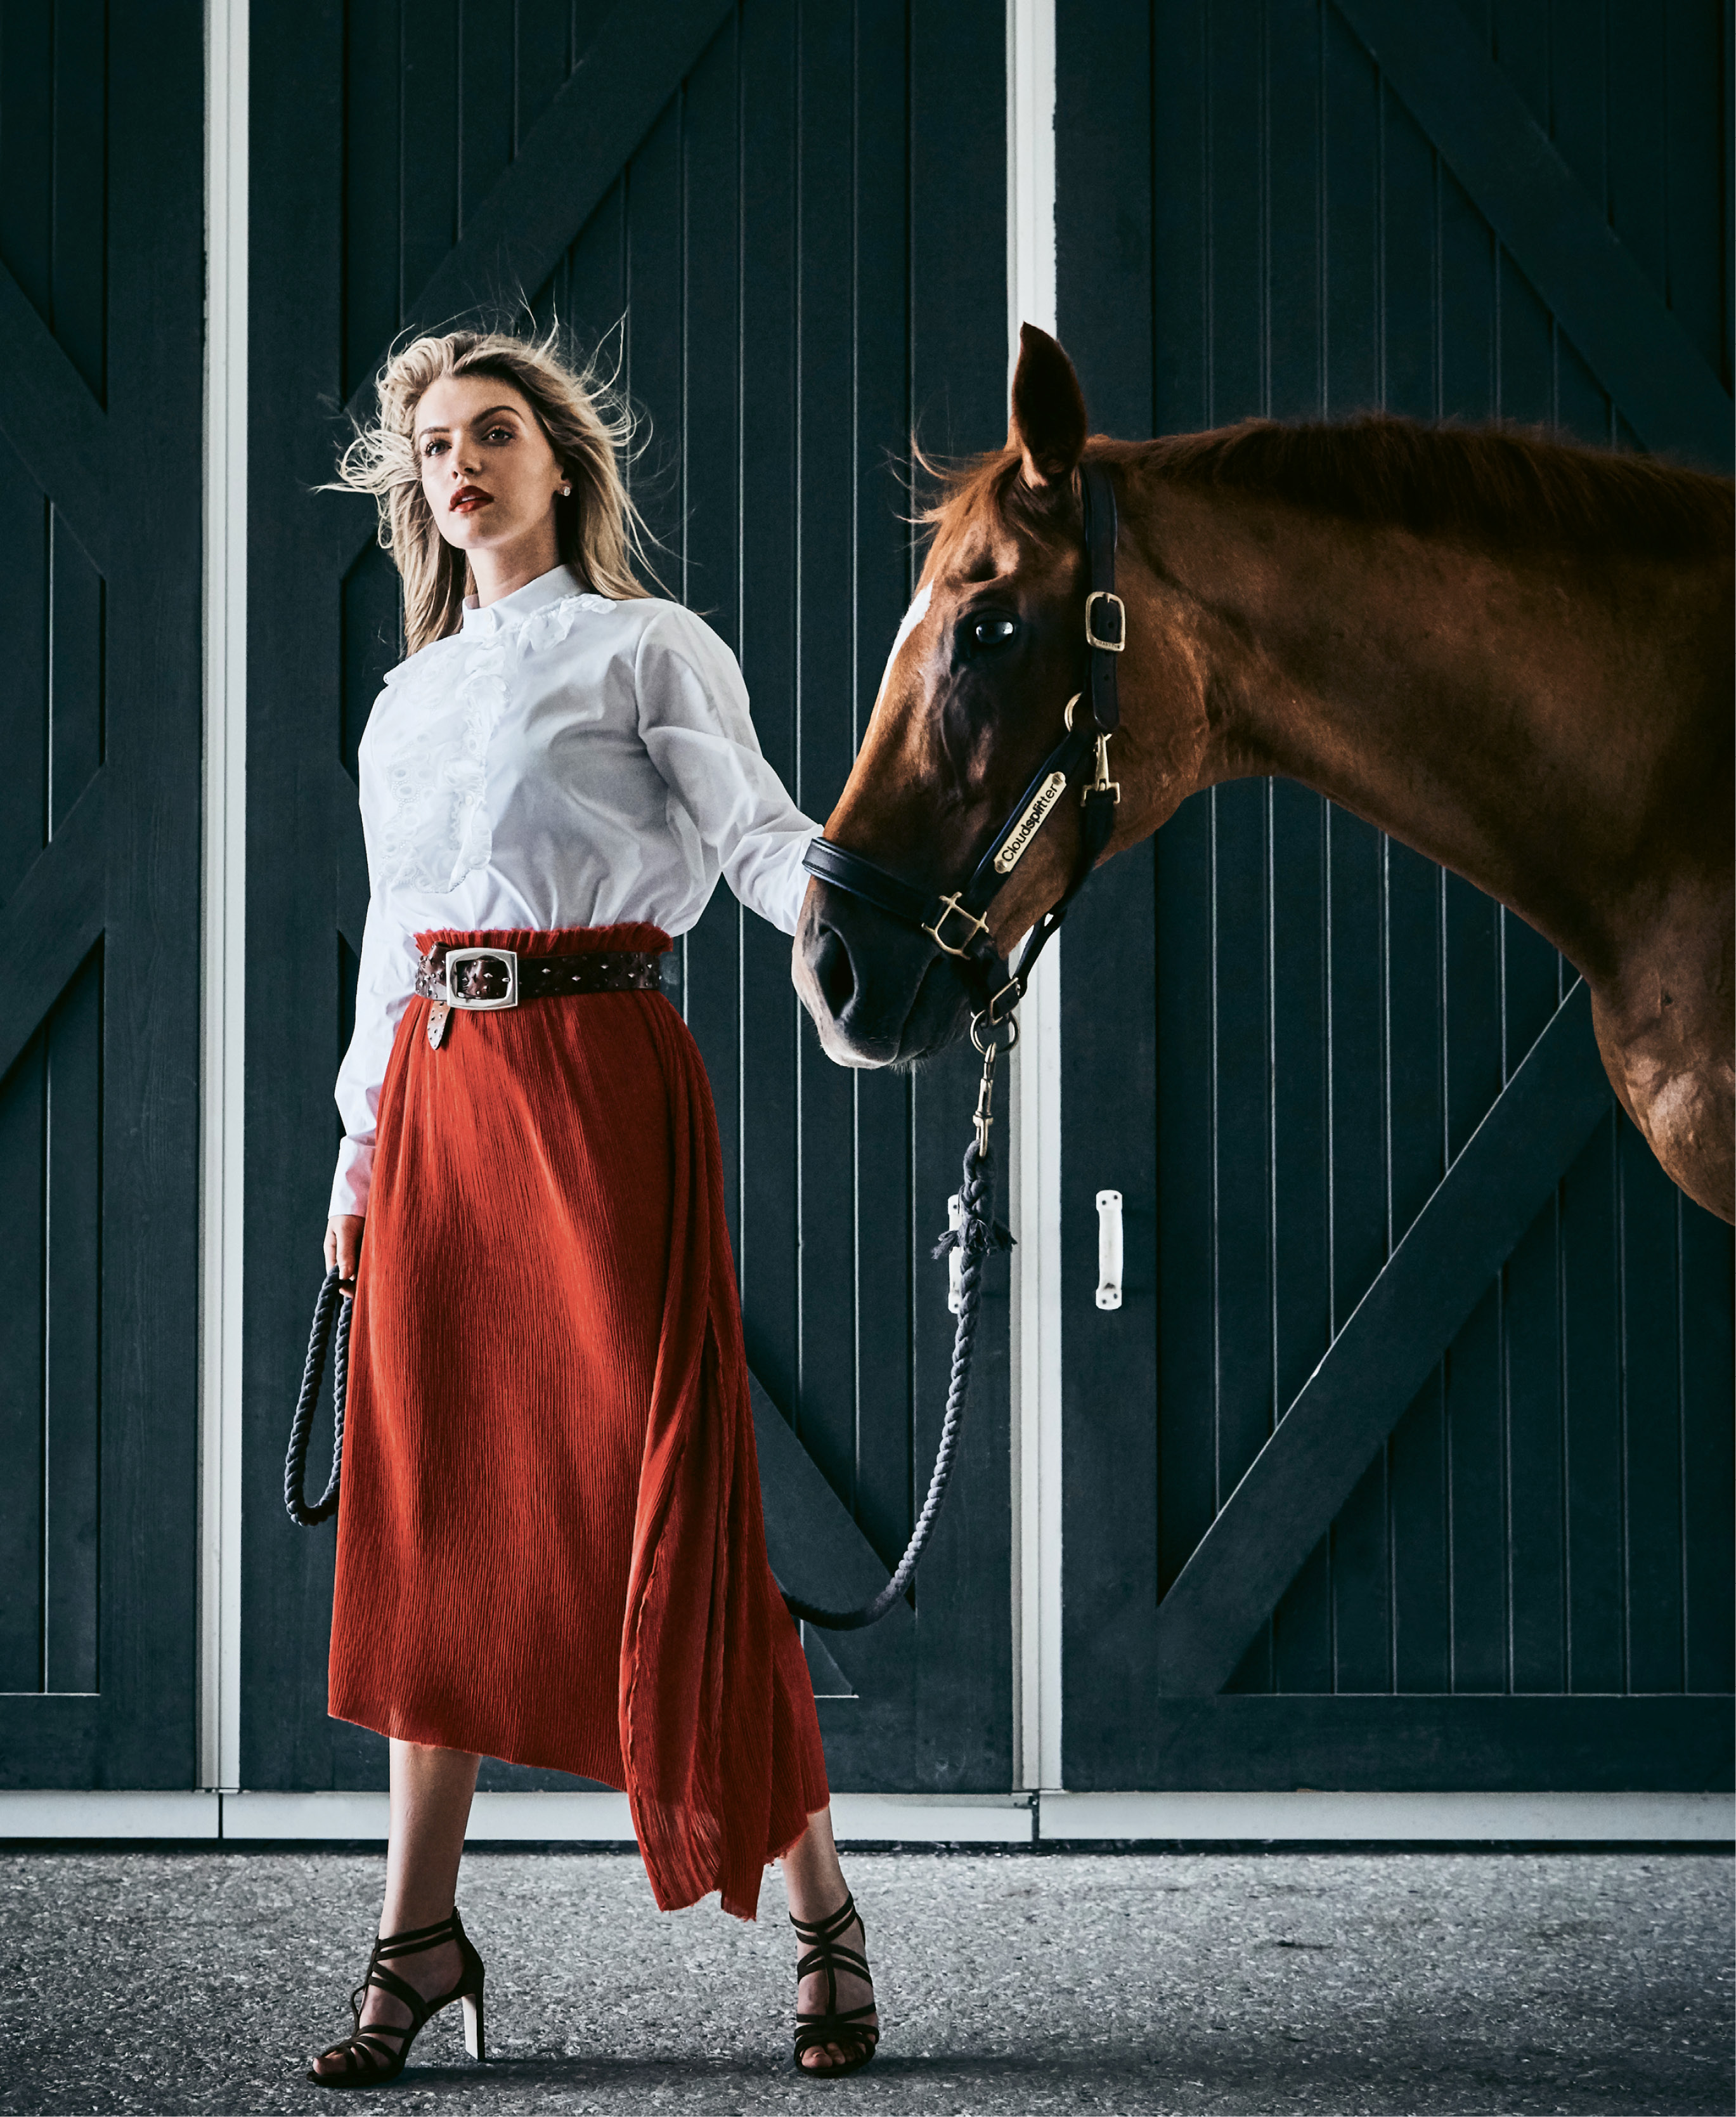 Taking the Lead - Chloé embroidered poplin blouse, price upon request at RTW; Verandah silk-blend midi skirt, $228 at Maris DeHart; Suzi Roher leather belt, $462, and Jimmy Choo “Selina” suede sandal, $850, both at Gwynn’s of Mount Pleasant; Spartina 449 “Night &amp; Day” crystal earrings, $24 at Woodhouse Day Spa.  Pictured with Cloudsplitter (owned by Shelby de Freitas)